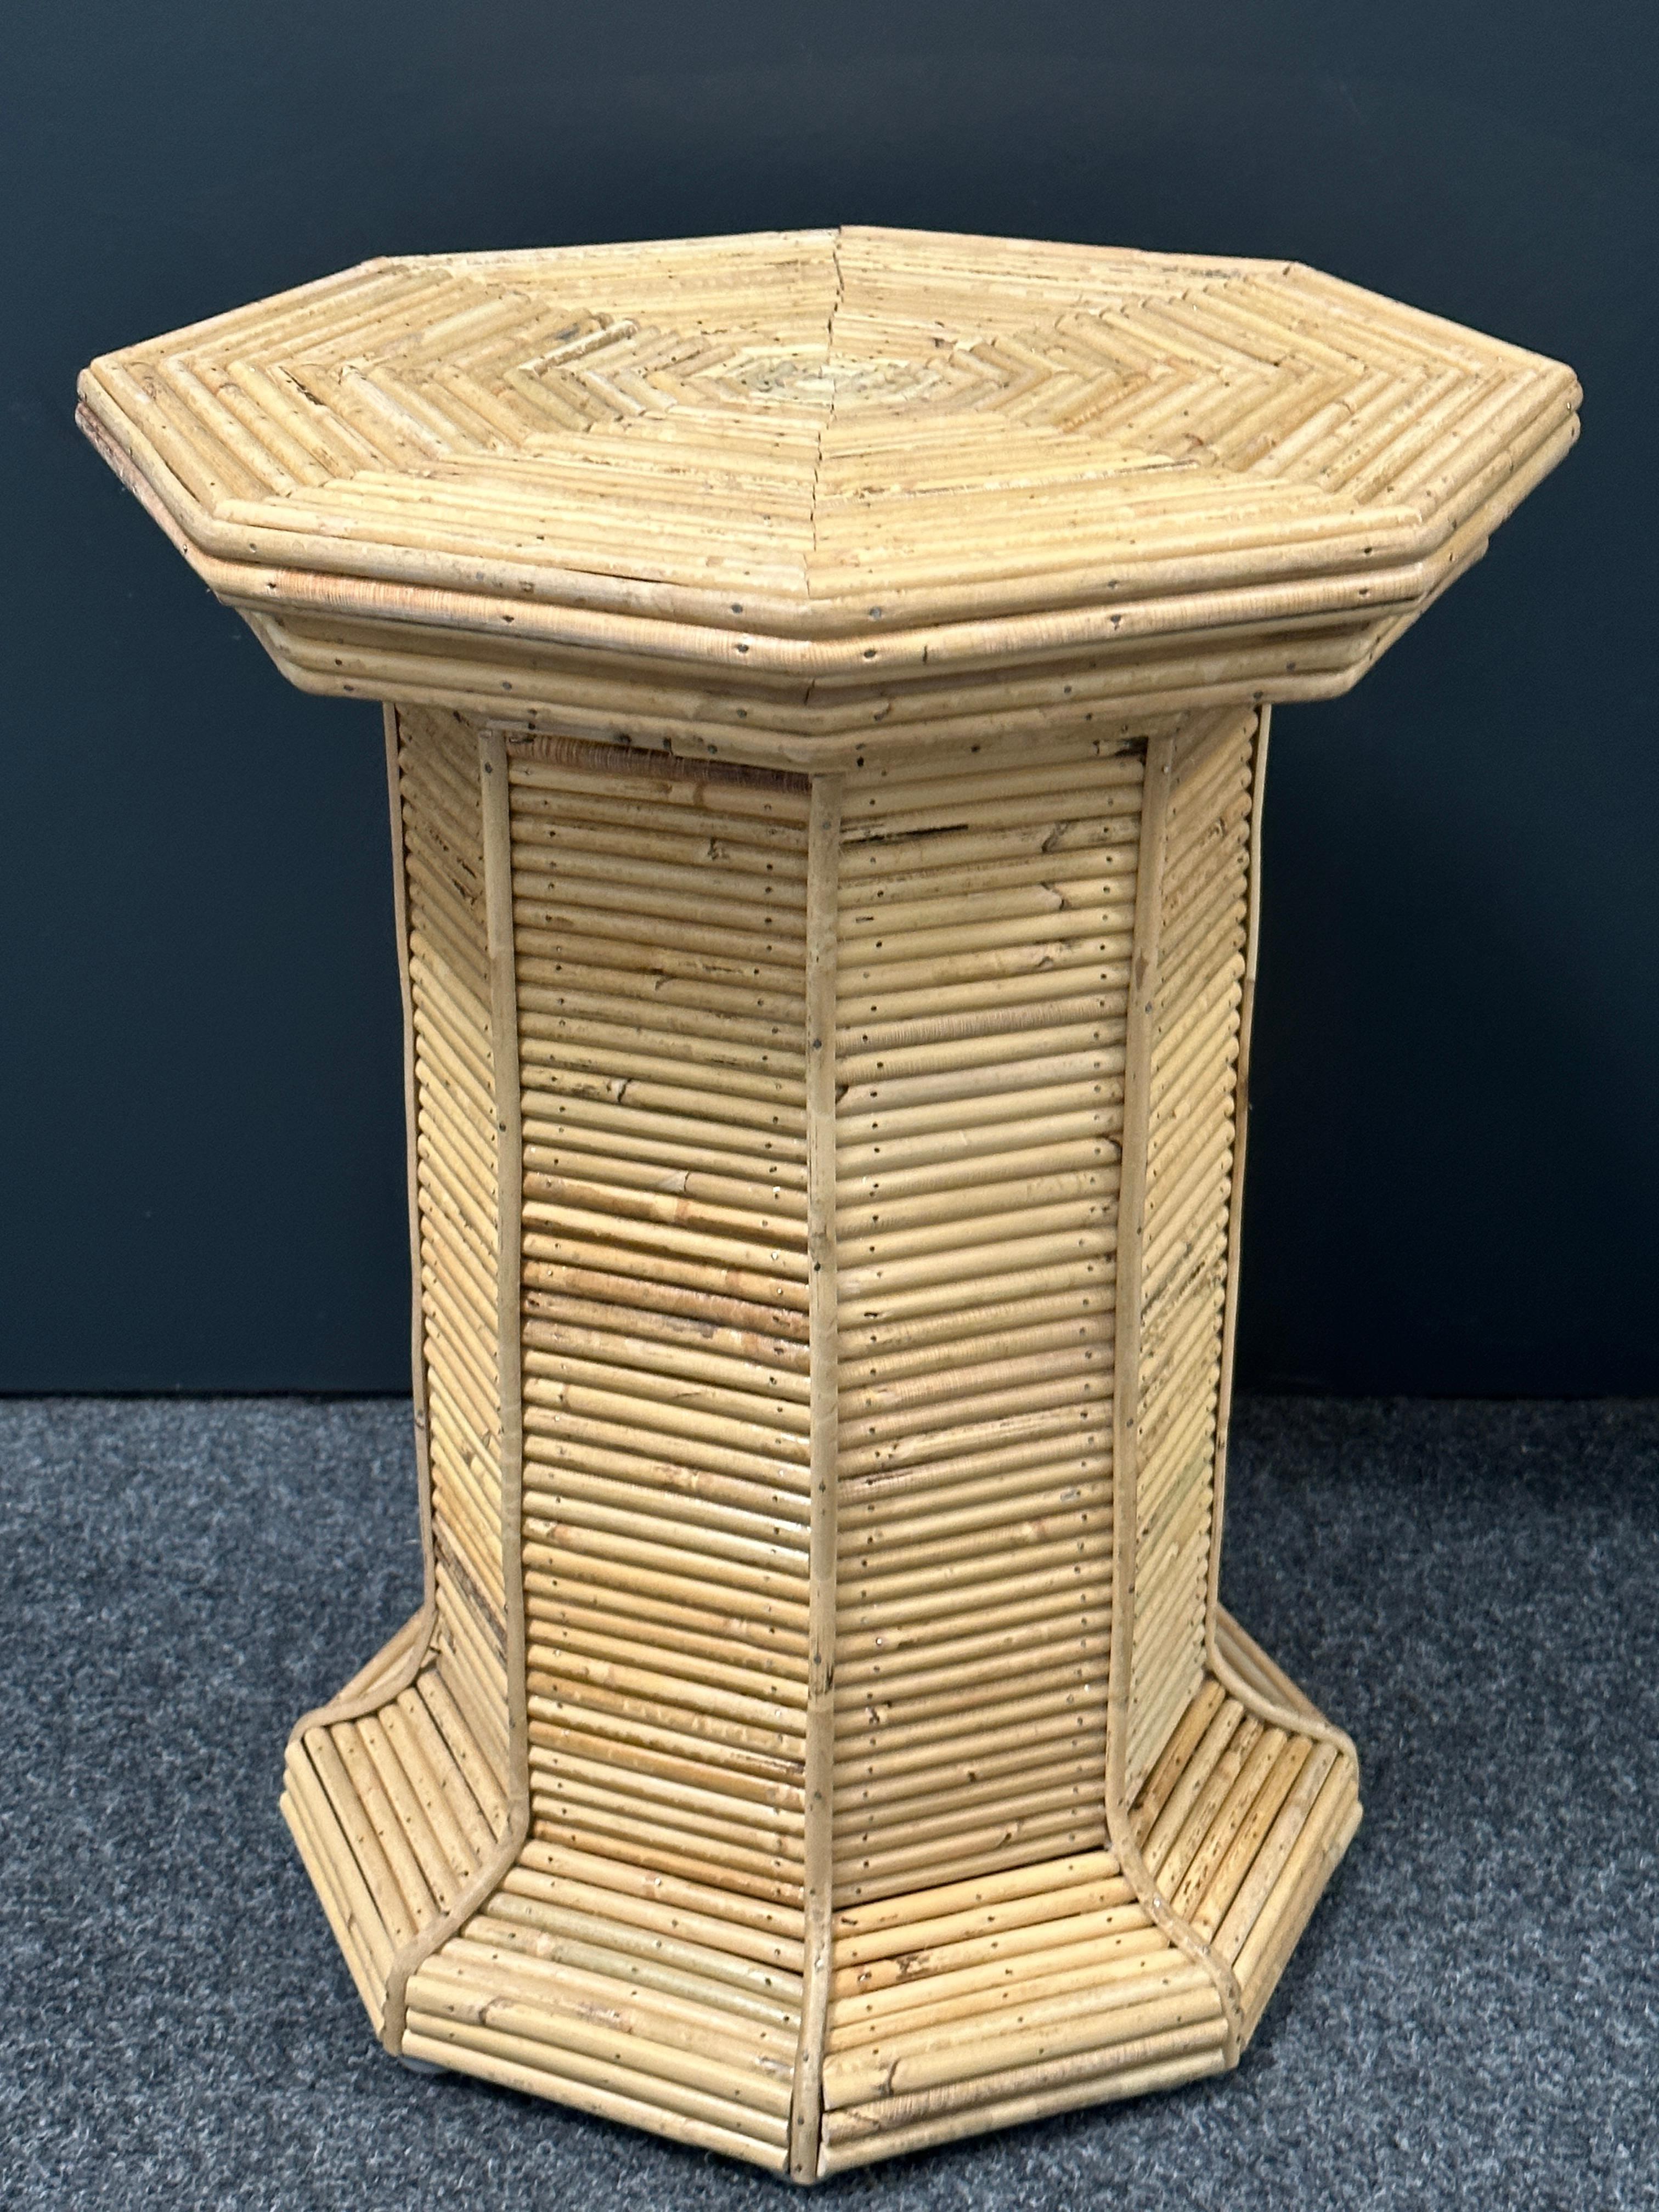 Vivai del Sud Bamboo Handcrafted Stylish Mid-Century Modern Rattan Pedestal  For Sale 1